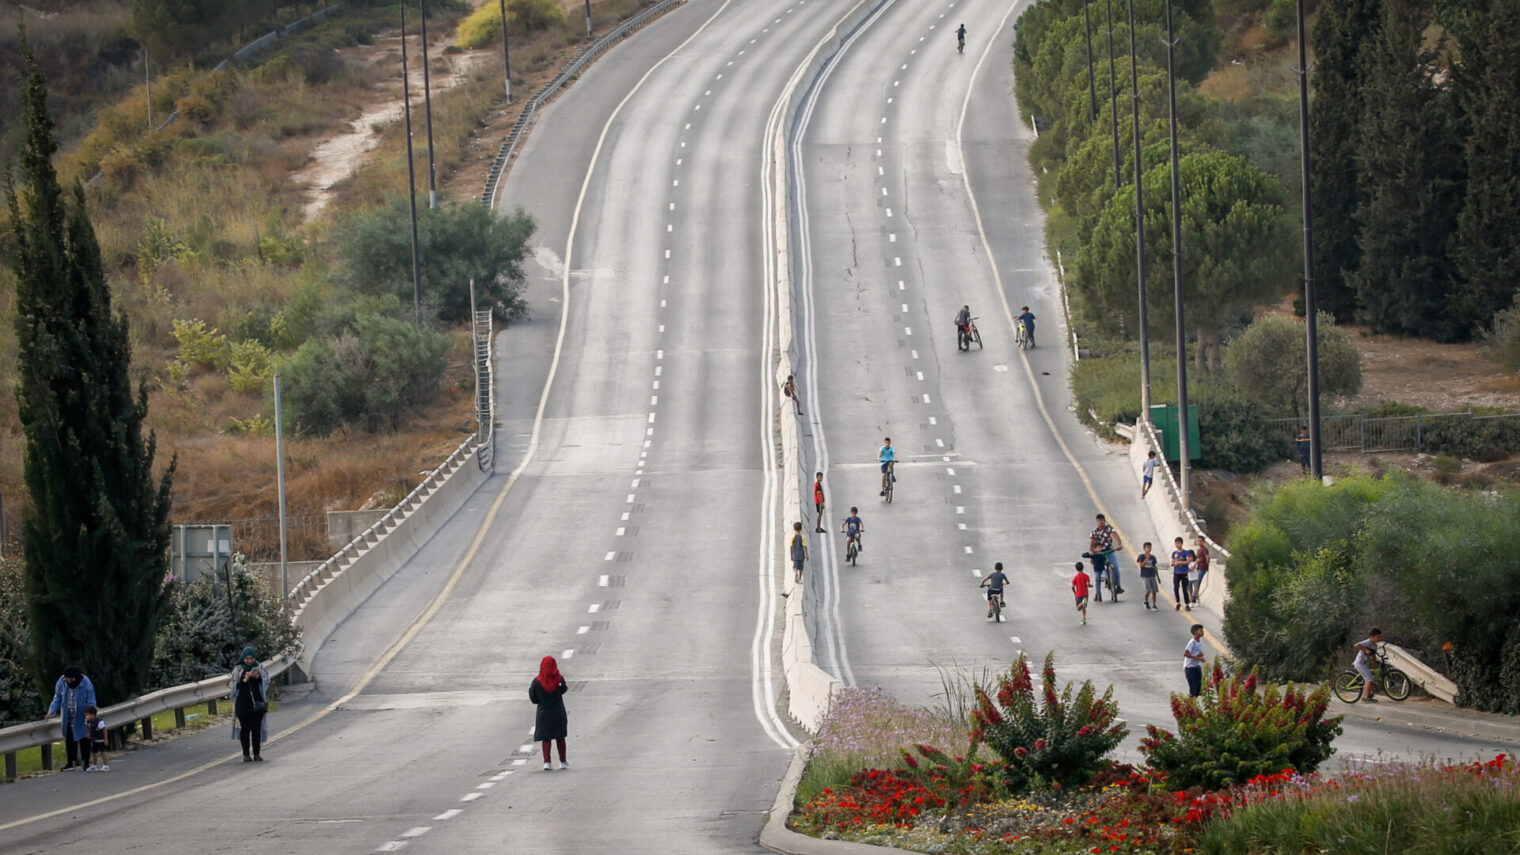 Children ride their bicycles along the empty Jerusalem roads on Yom Kippur, the Day of Atonement, and the holiest of Jewish holidays. Photo by Jamal Awad/Flash 90 